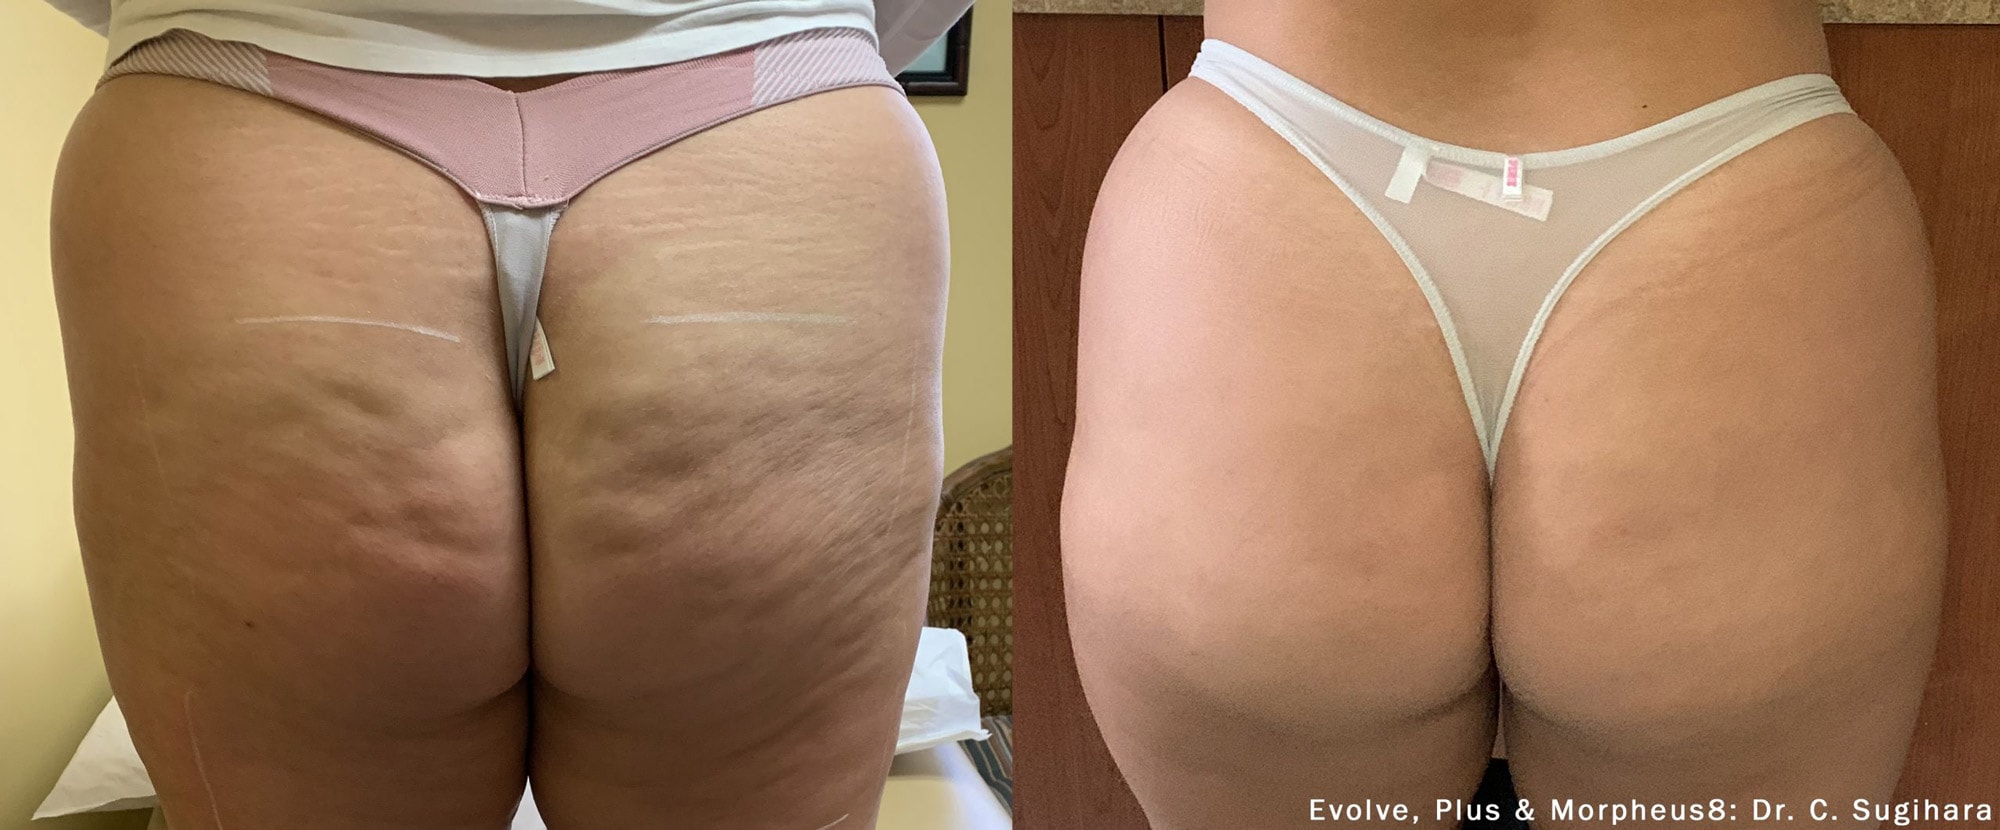 Before and After photos of Dr. Sugihara’s Morpheus8 and Forma Plus treatments reducing cellulite on a woman’s hips and butt